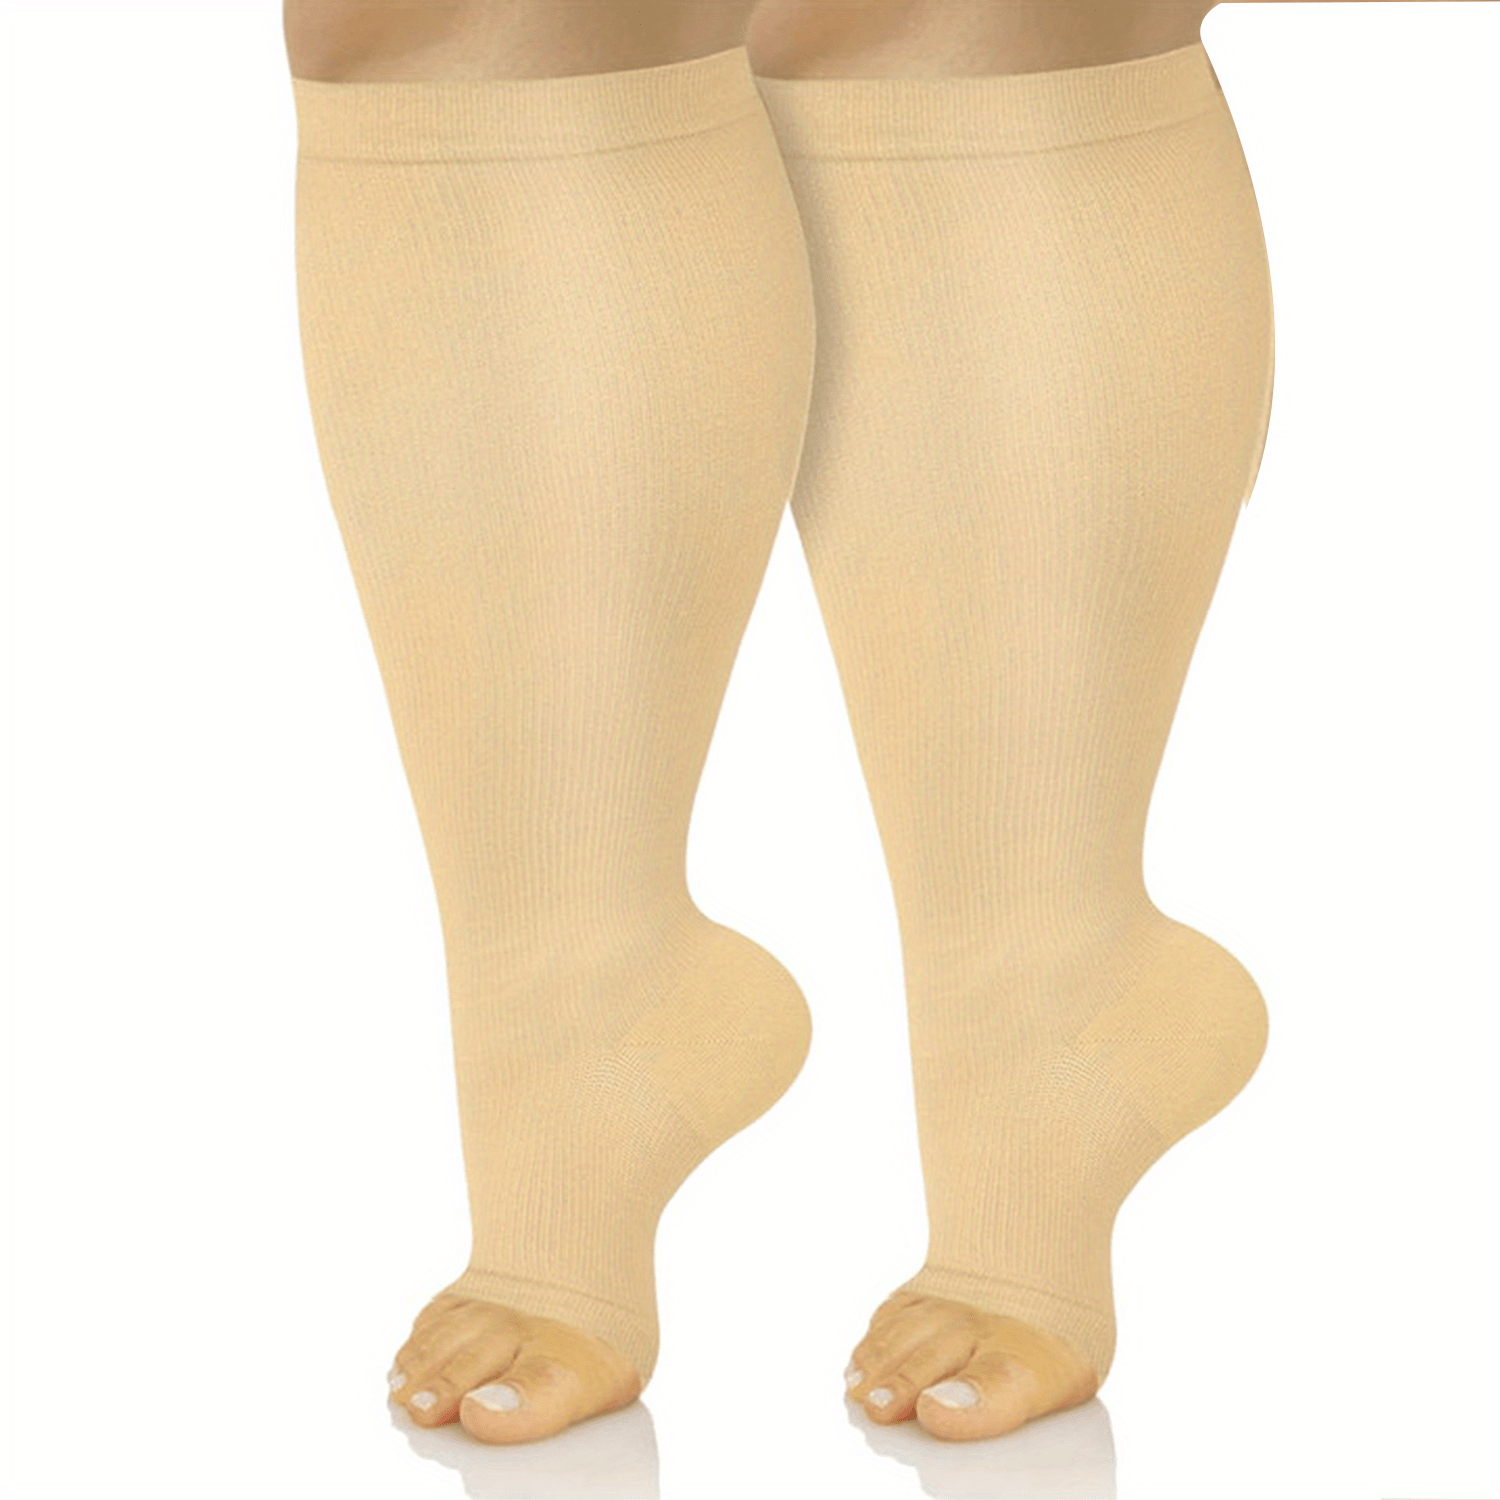 2 Pairs of Plus Size Copper Compression Socks: Improve Circulation & Blood  Flow for Athletic, Medical & Pregnant Women!